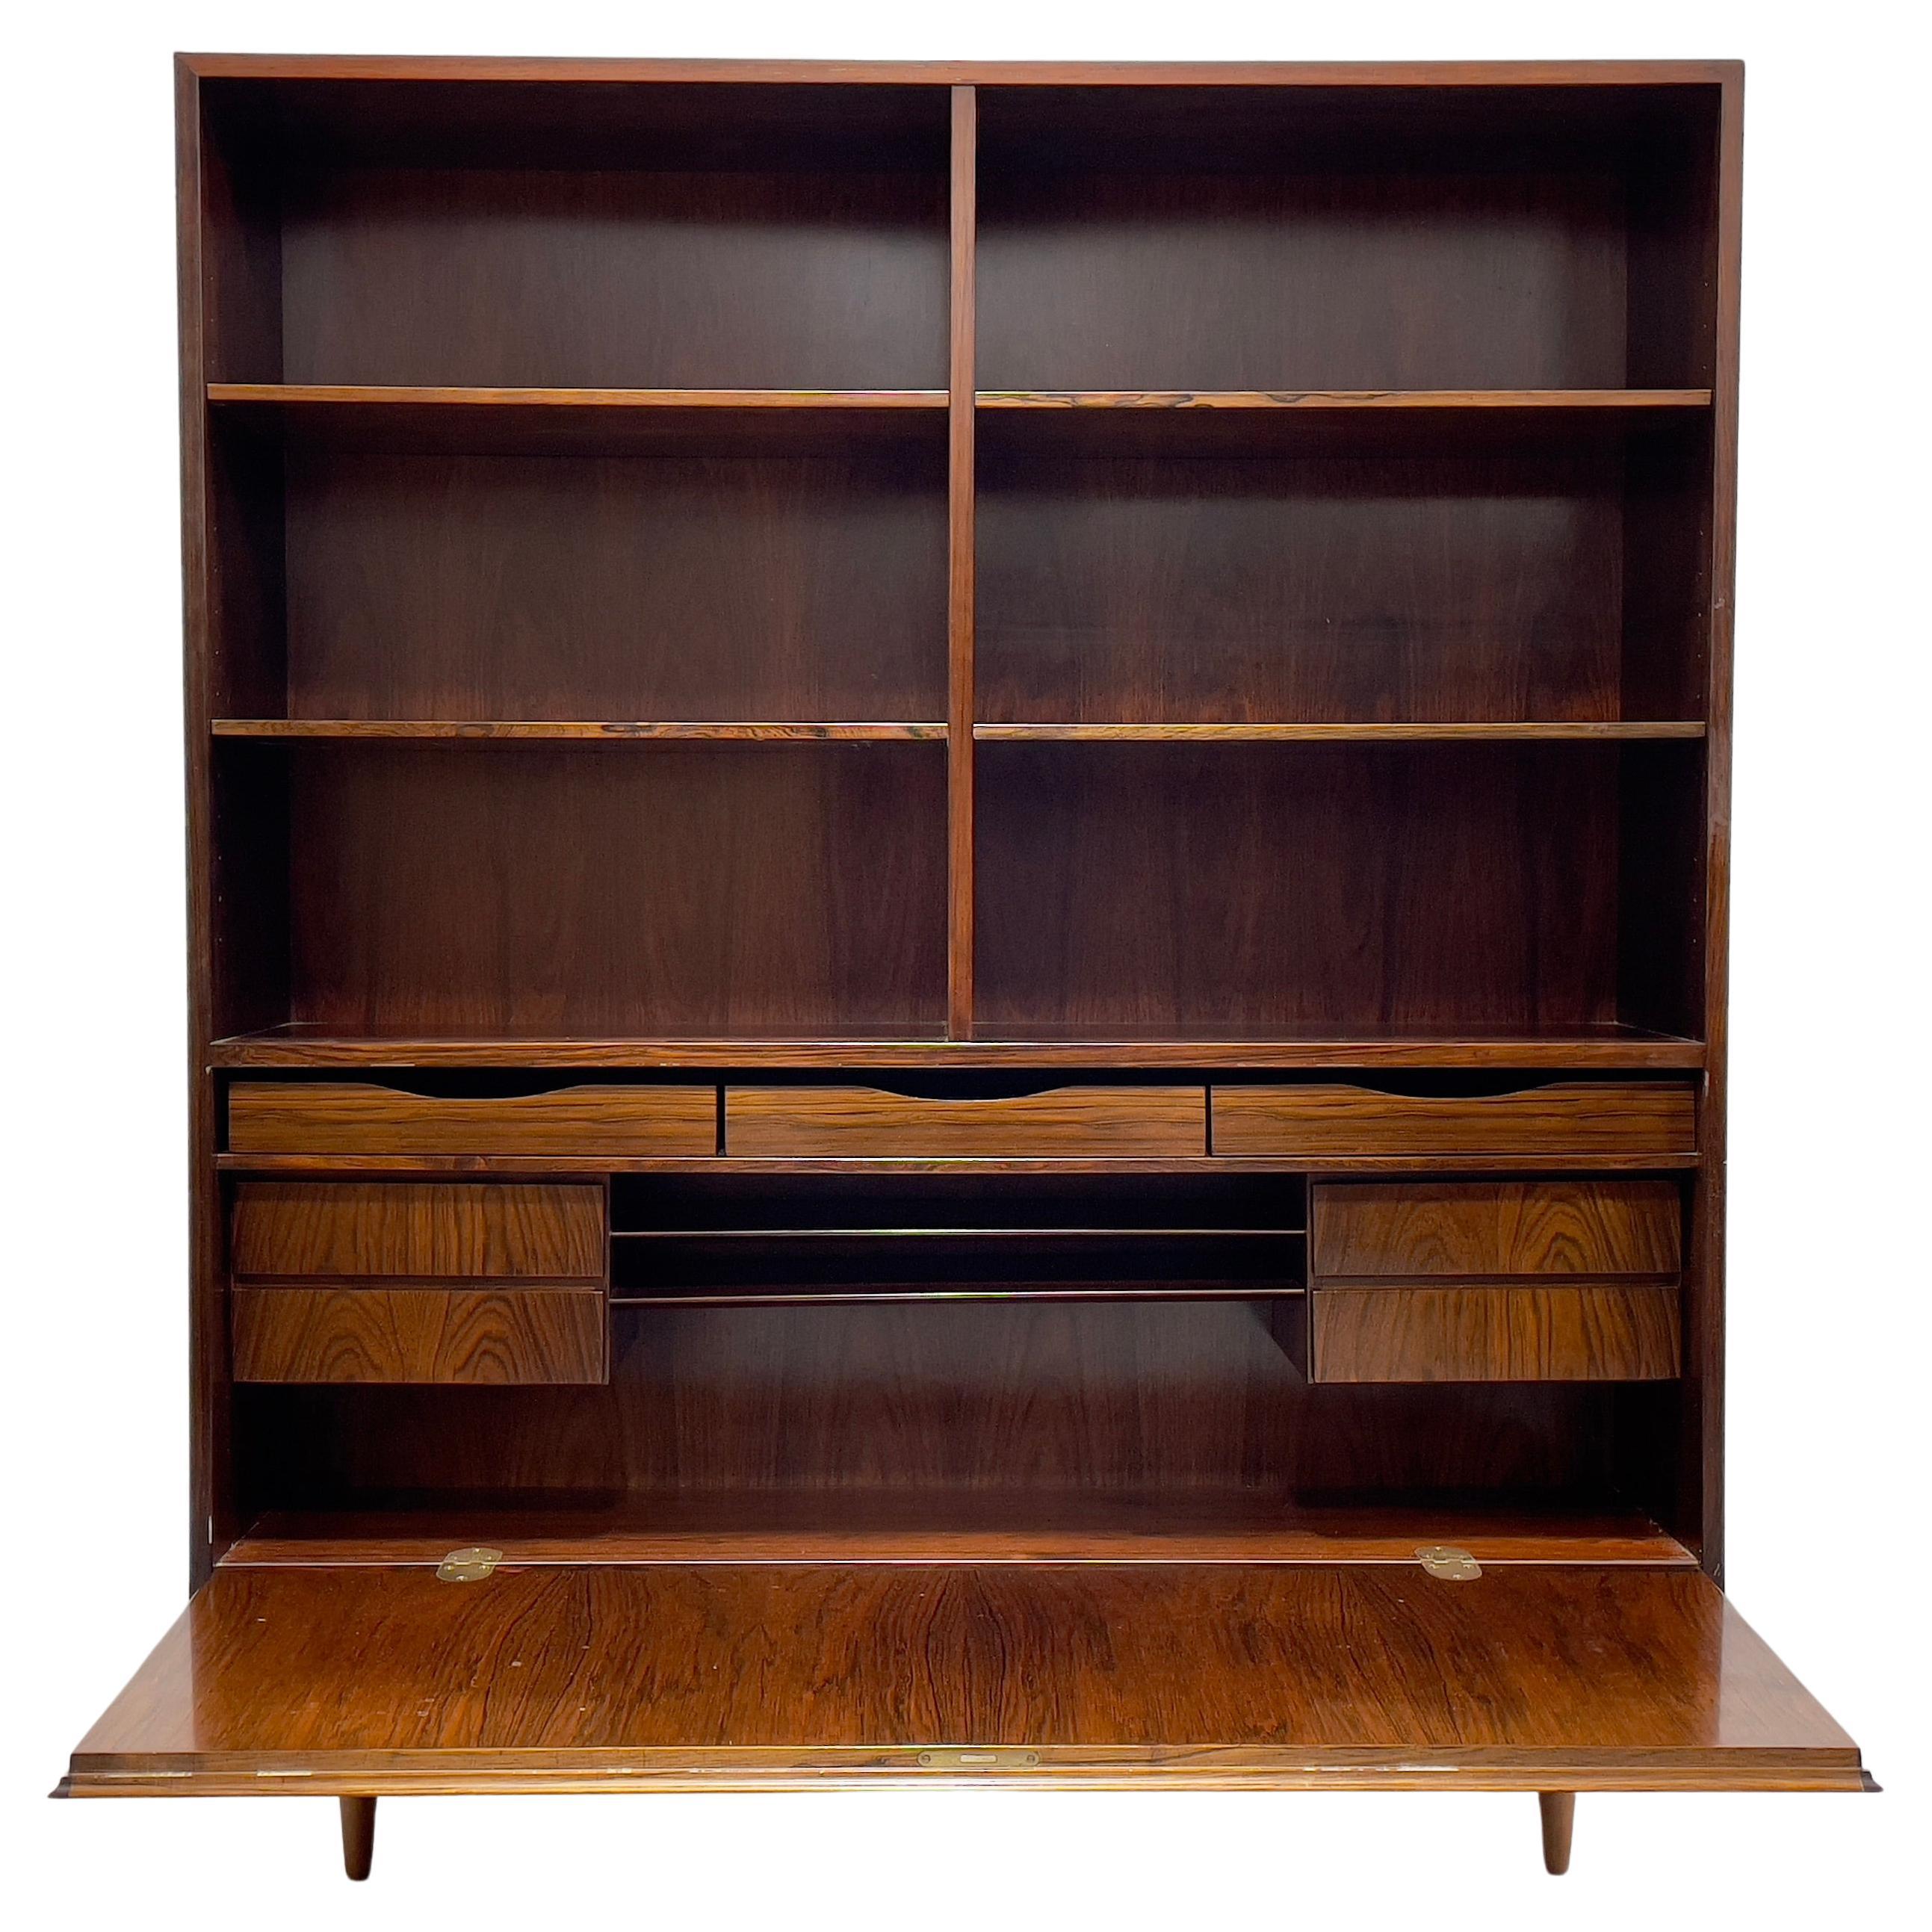 Exquisite Mid Century Modern ROSEWOOD bookcase / China Cabinet, c. 1960's. This stunning piece features 6 shelving areas in the upper area and all shelves are removable and adjustable. The lower area unlocks (yes, we have the original key!) to